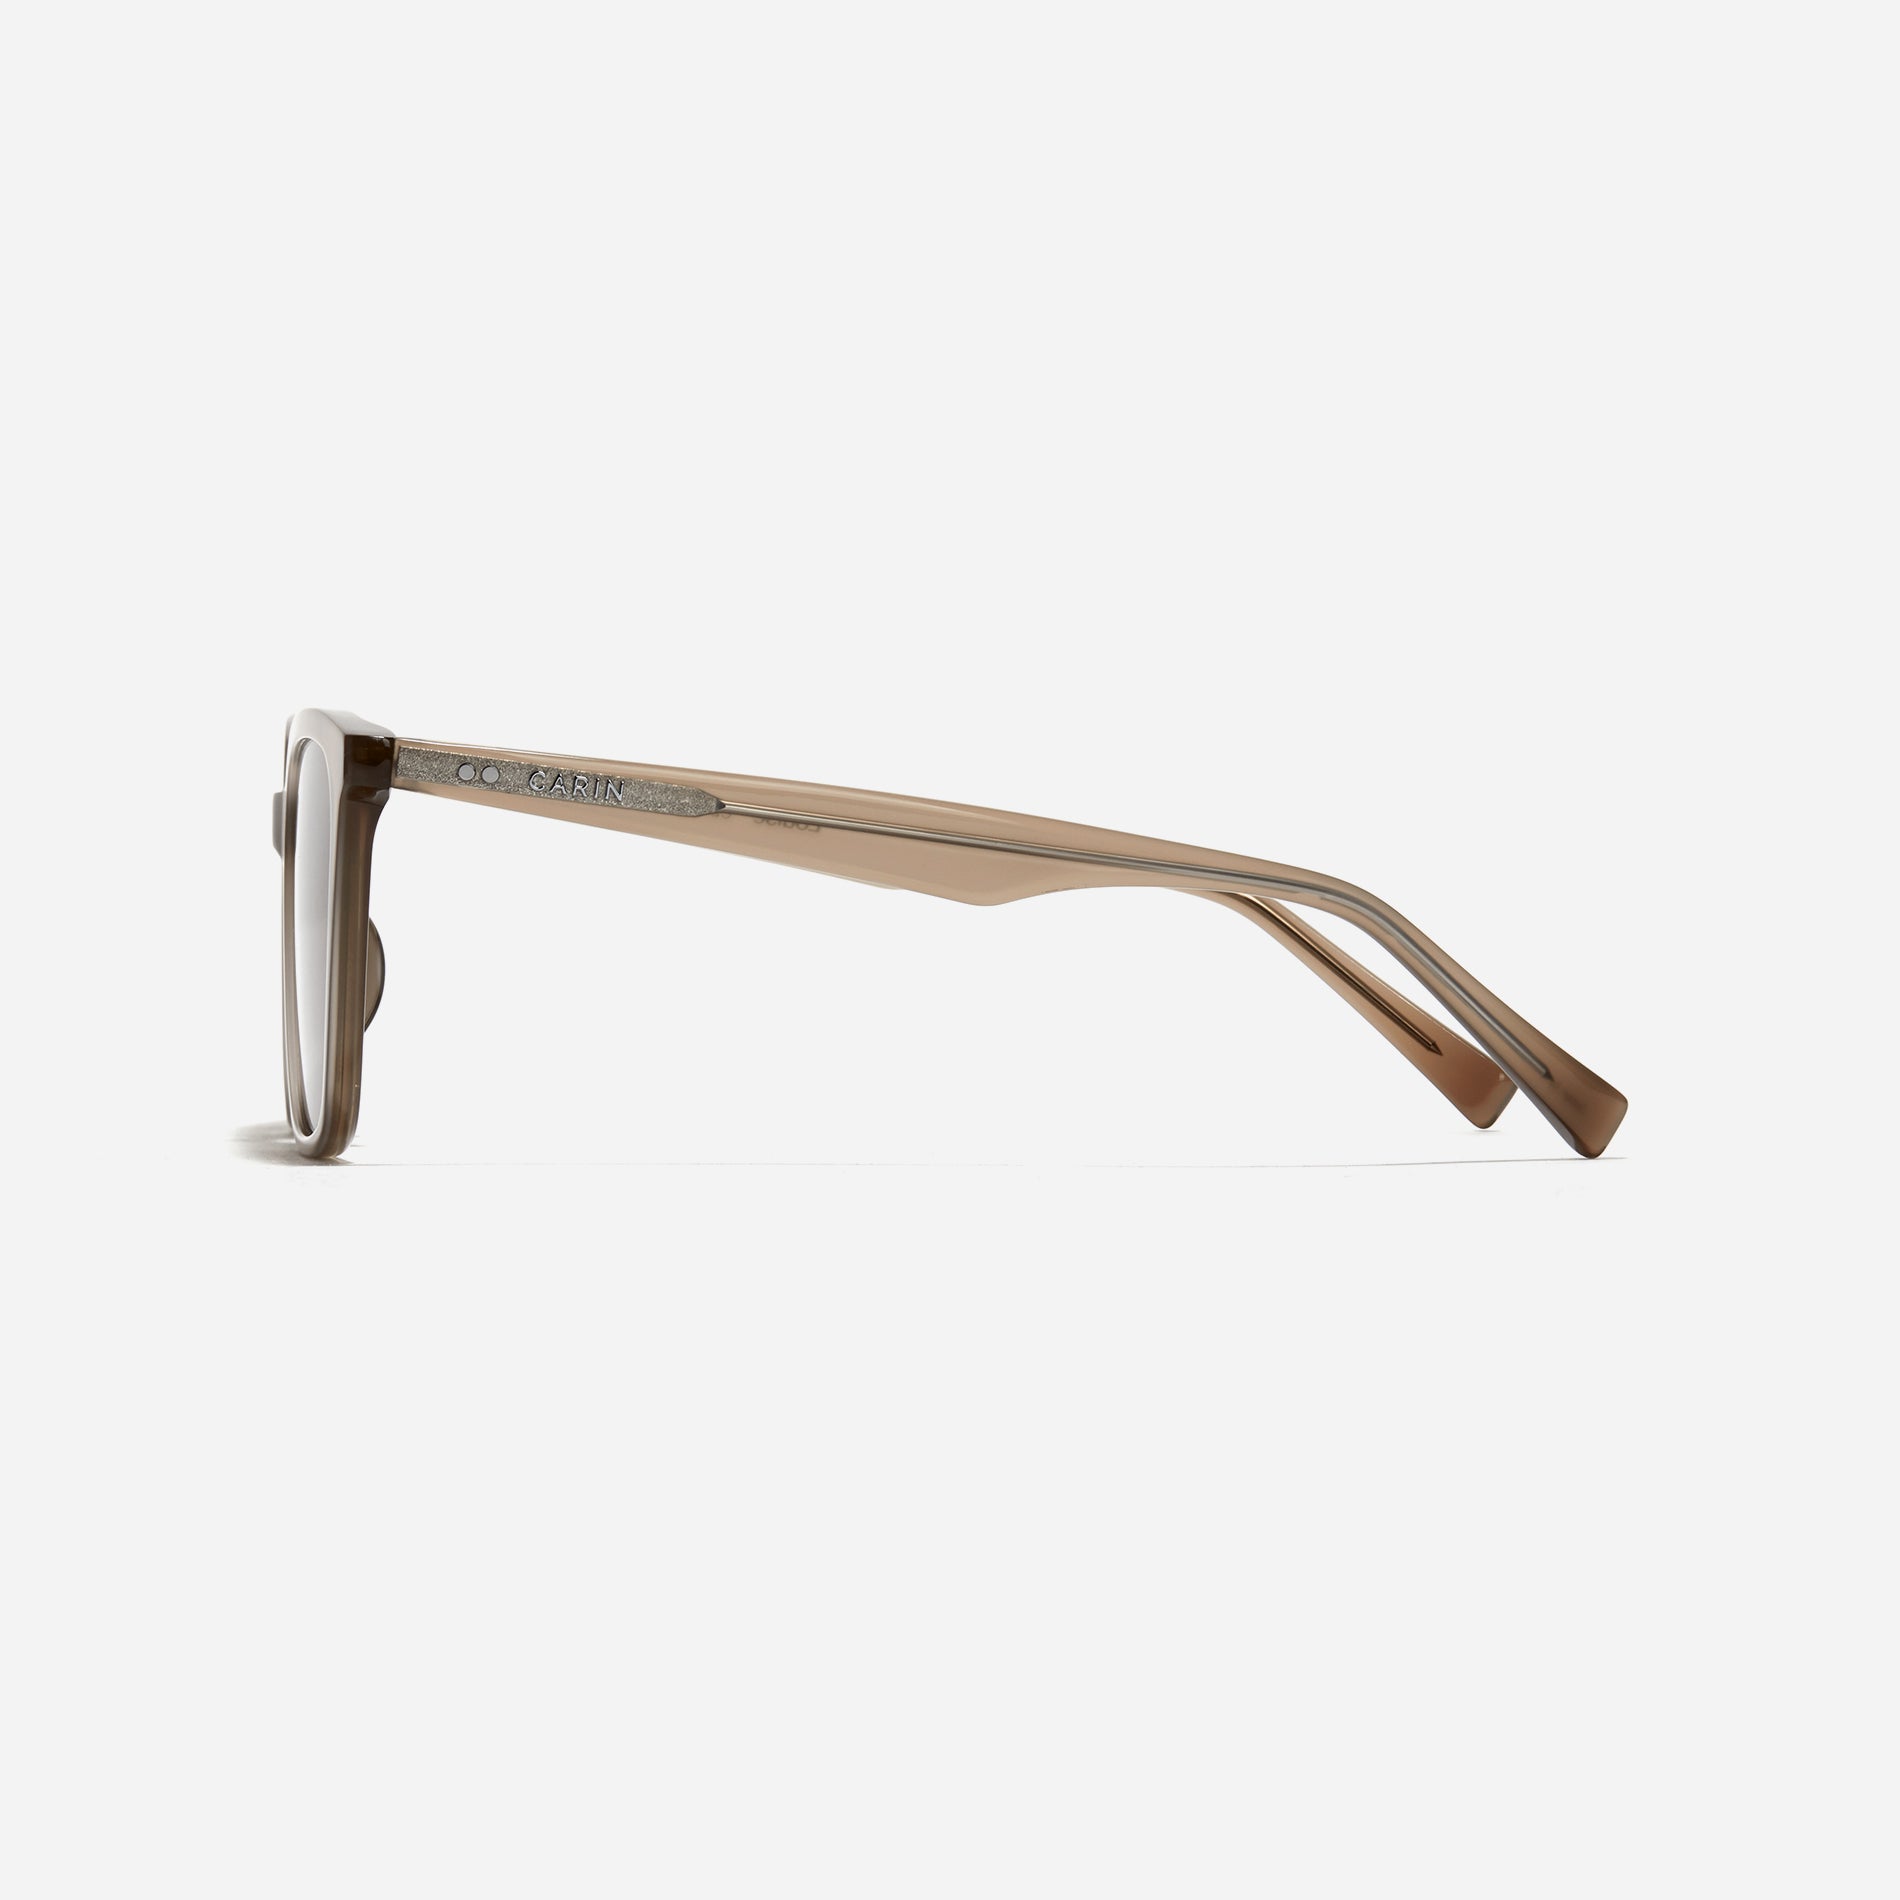 Square-shaped sunglasses with a sleek, straight-edged top front, providing a versatile and neutral style.